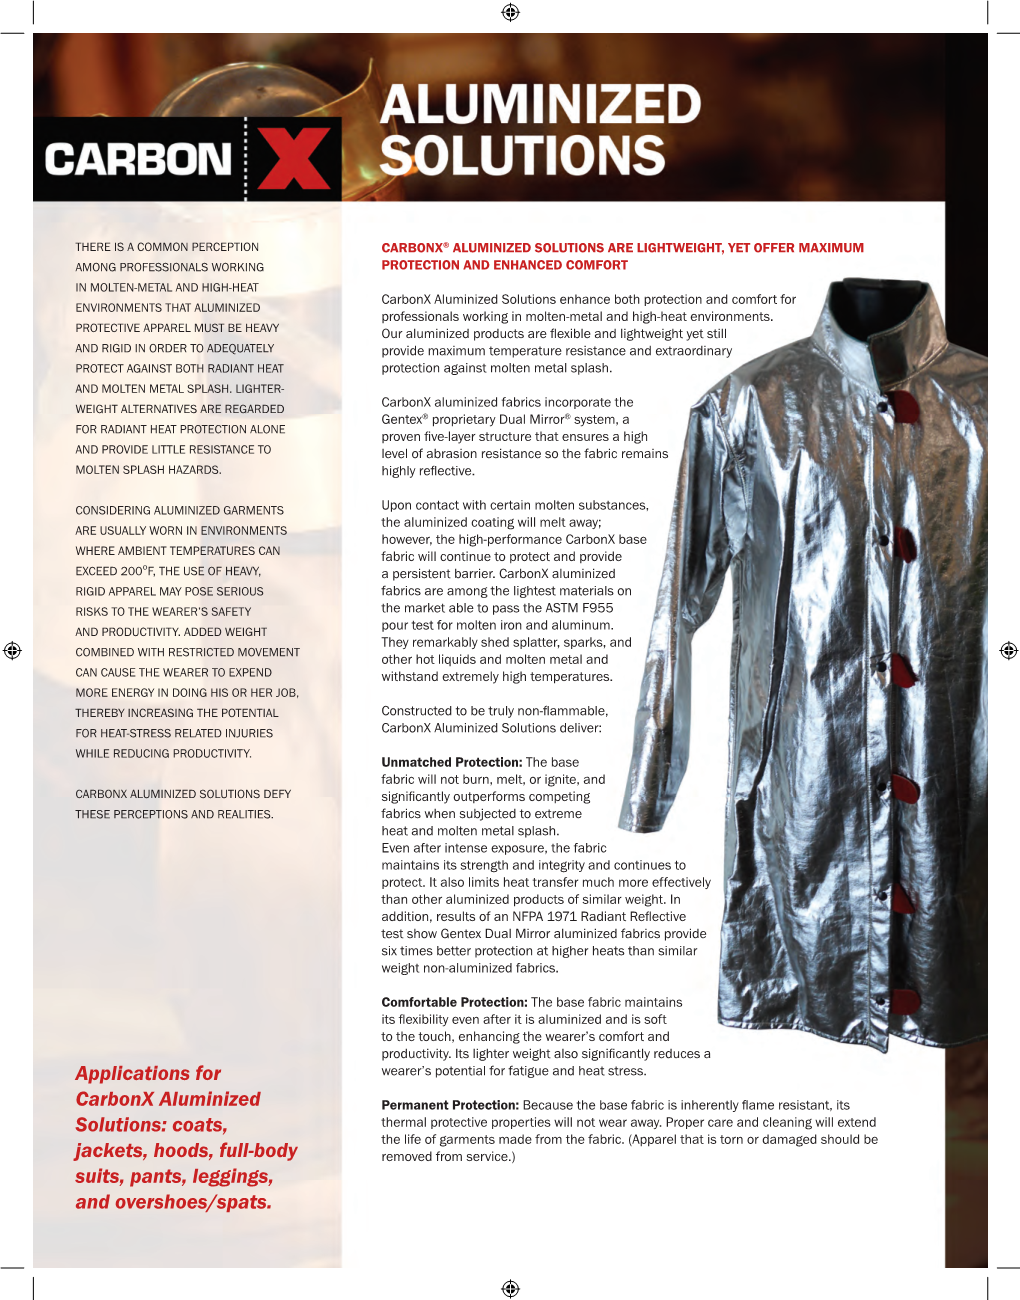 Applications for Carbonx Aluminized Solutions: Coats, Jackets, Hoods, Full